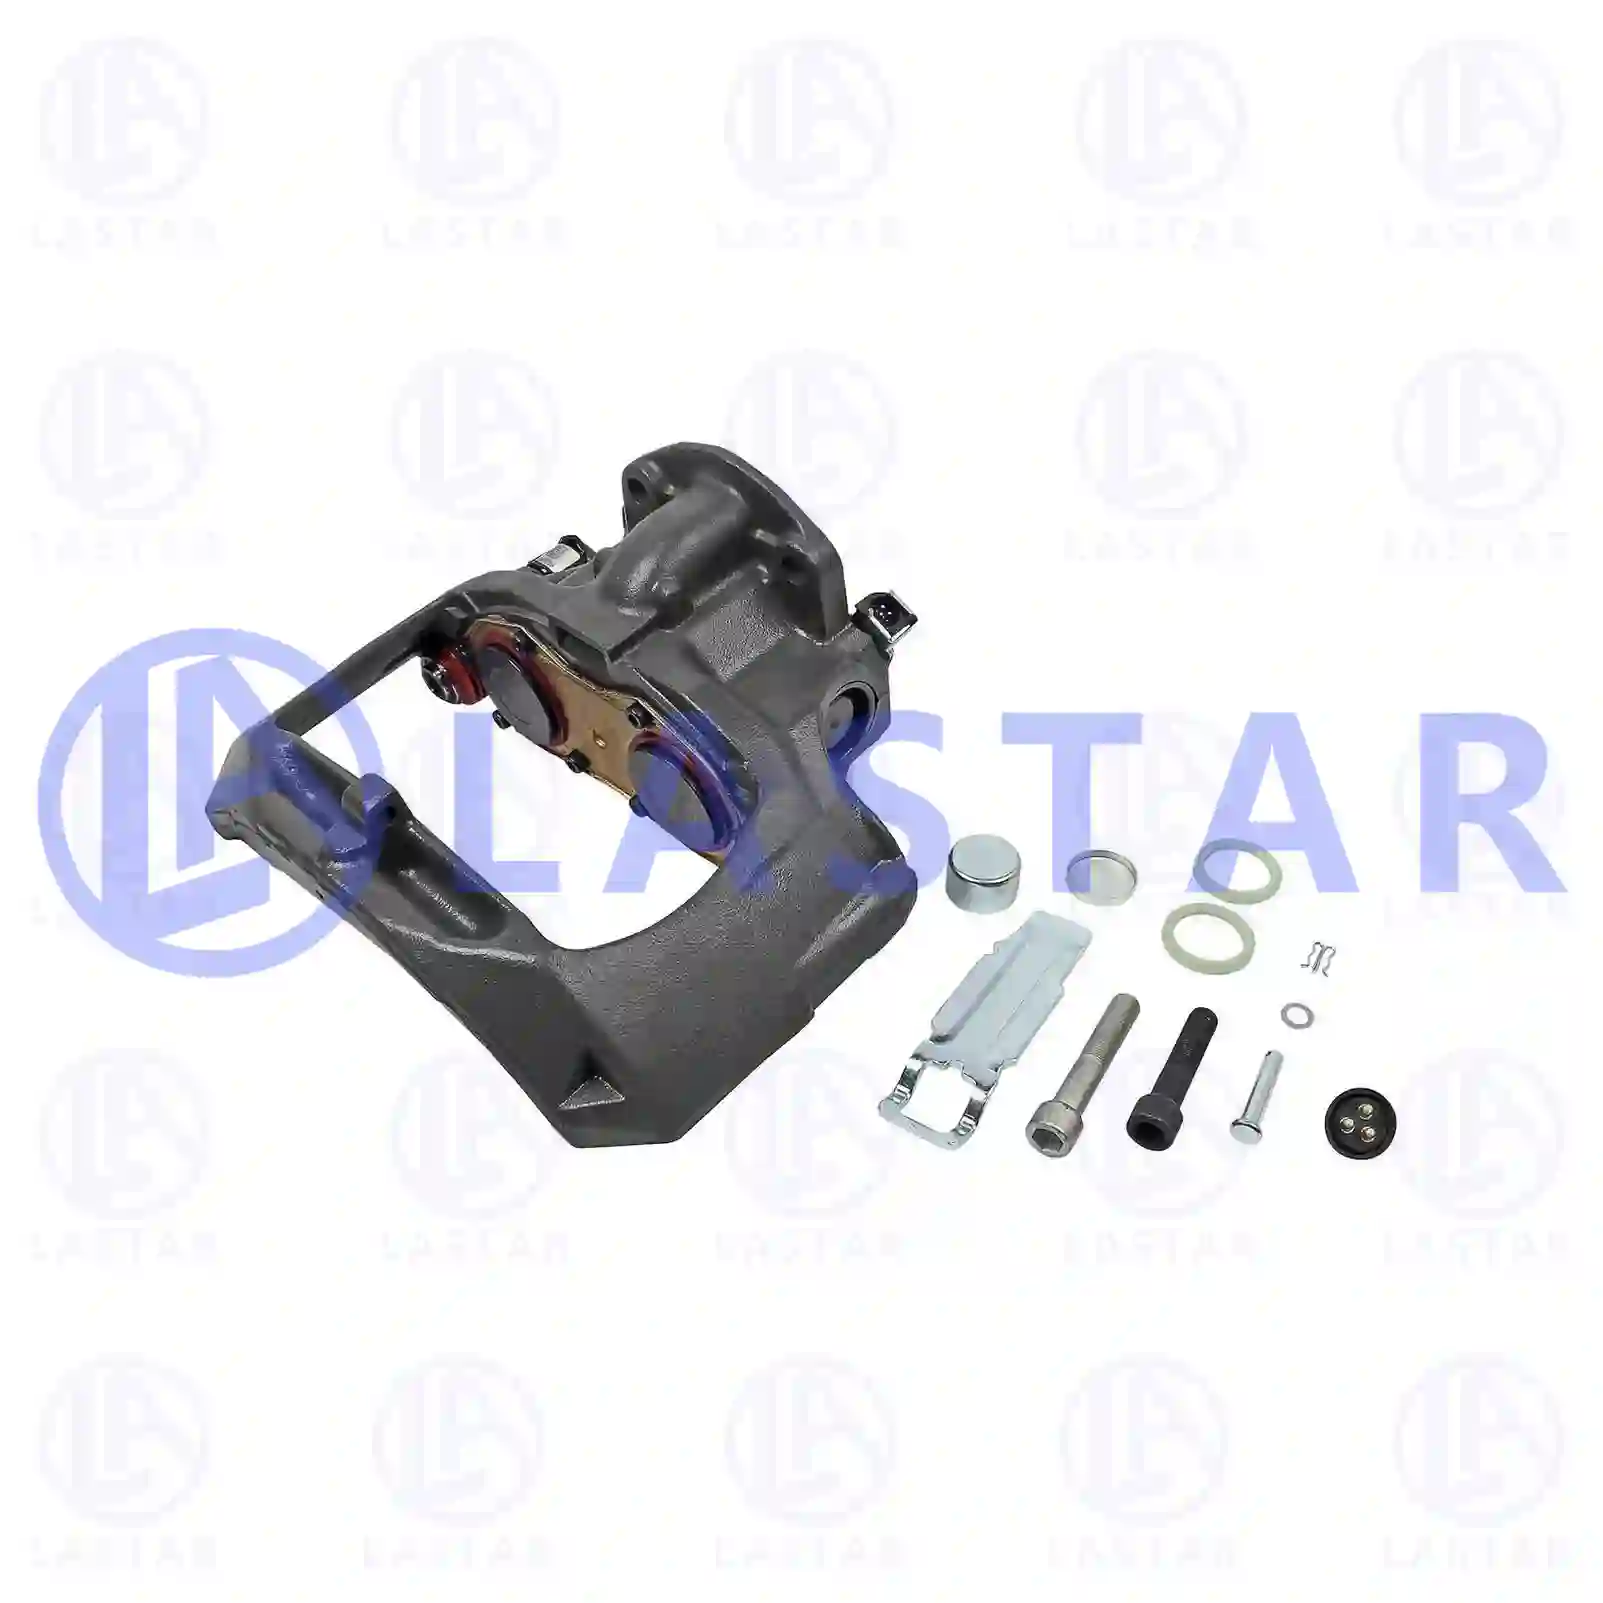 Brake caliper, reman. / without old core, 77716437, 1928821, 573022 ||  77716437 Lastar Spare Part | Truck Spare Parts, Auotomotive Spare Parts Brake caliper, reman. / without old core, 77716437, 1928821, 573022 ||  77716437 Lastar Spare Part | Truck Spare Parts, Auotomotive Spare Parts